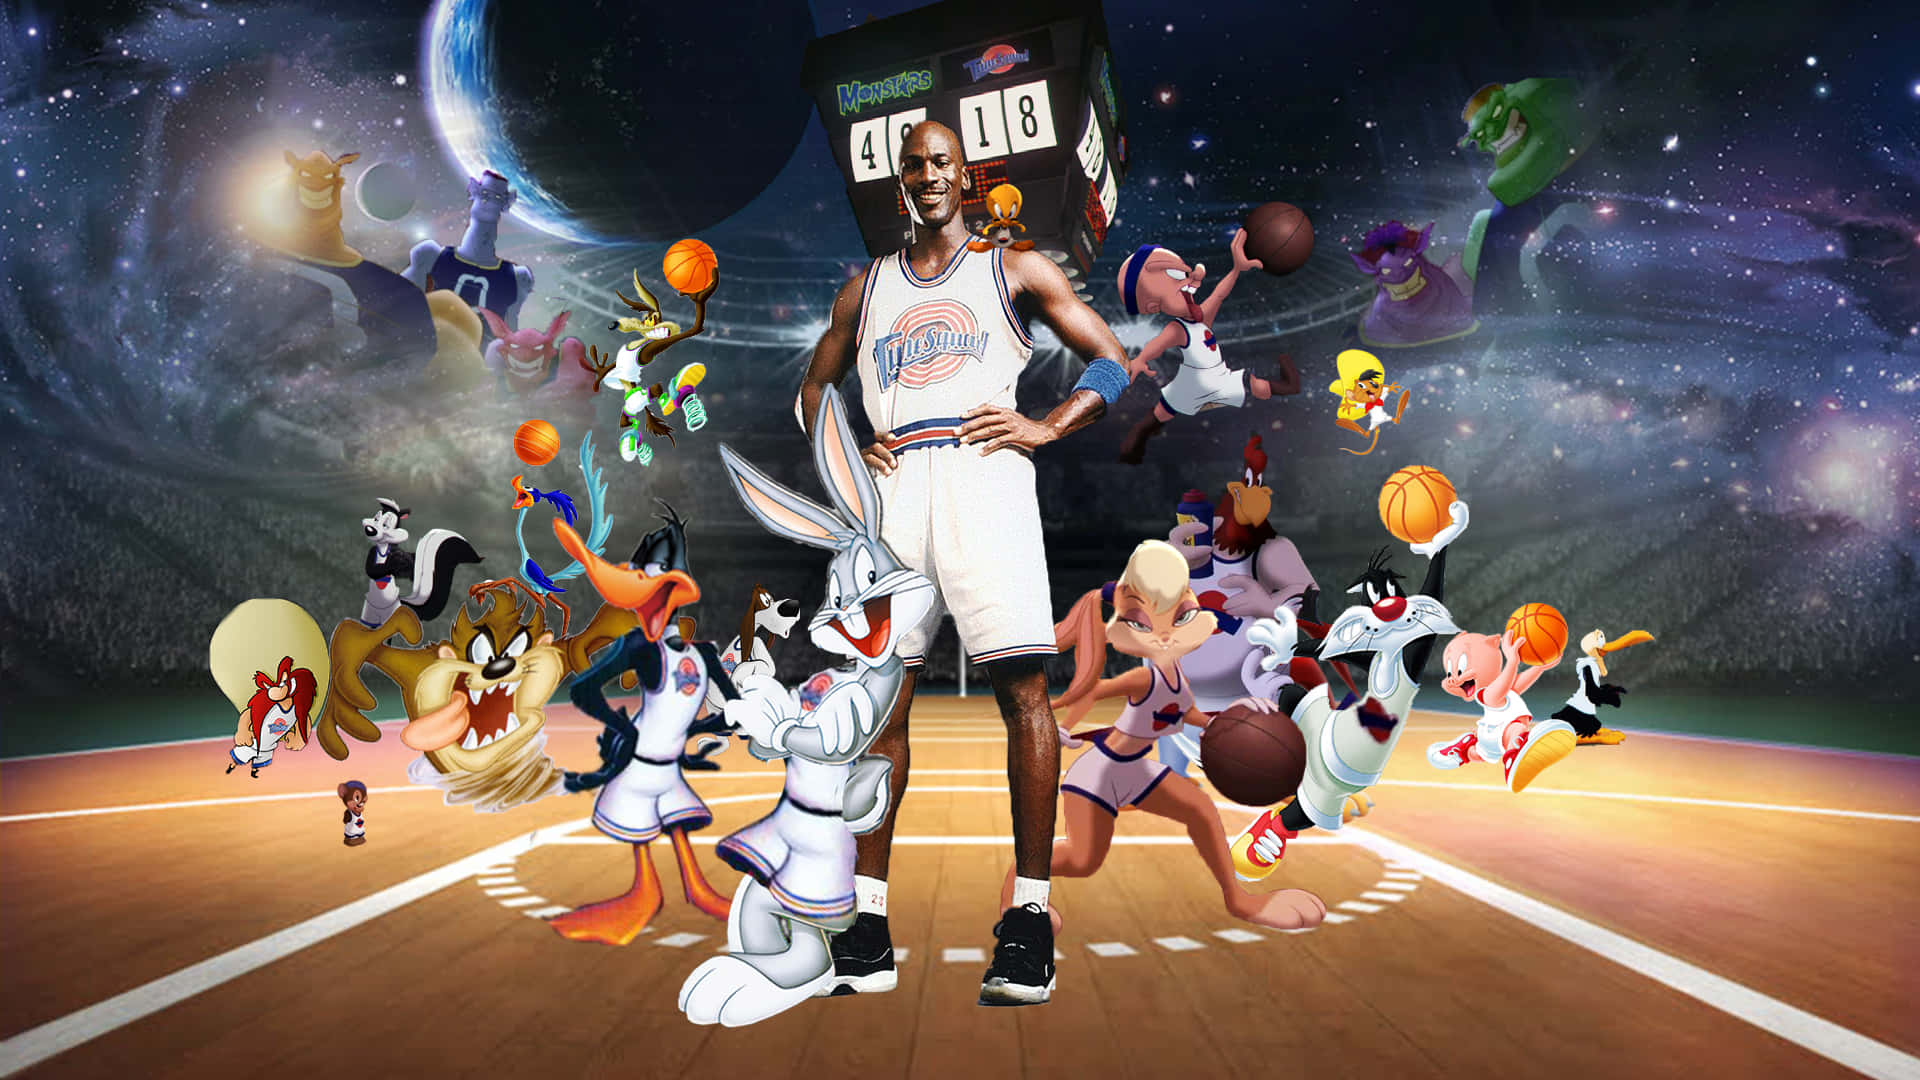 Grab your sneakers and join the Cool Space Jam! Wallpaper